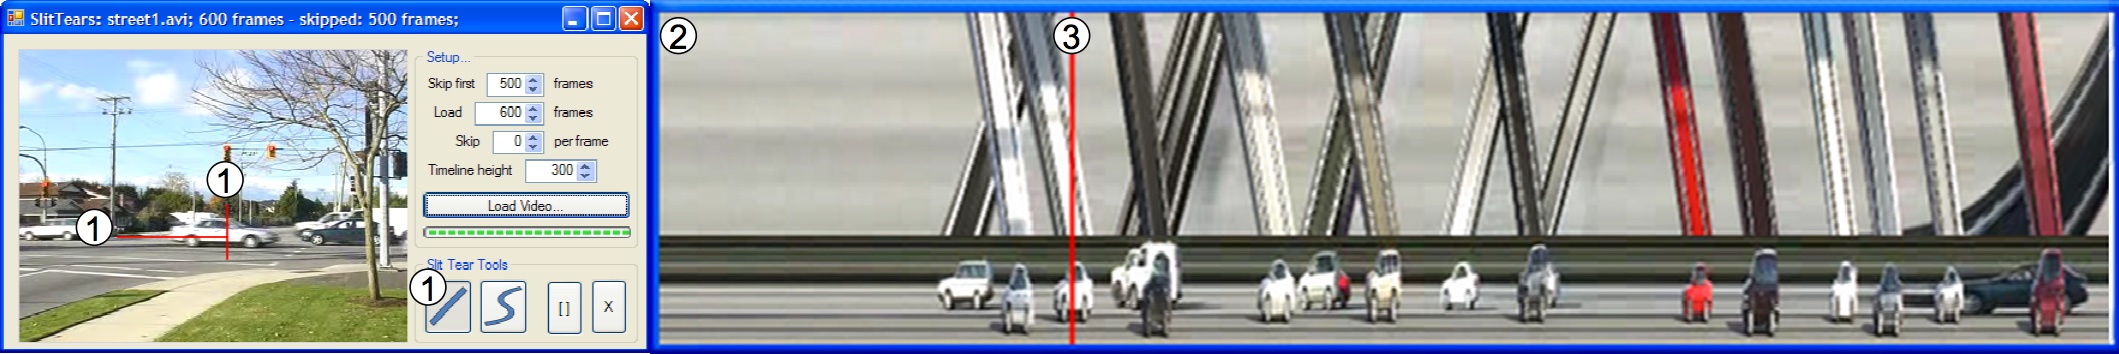 Slit-tears ease exploration of video data. Here: (1) the analyst draws to red slit tears in the video frame; (2) the timeline updates to show what happens under each tear for every frame in the video, while (3) the current frame shown is indicated by the red line.